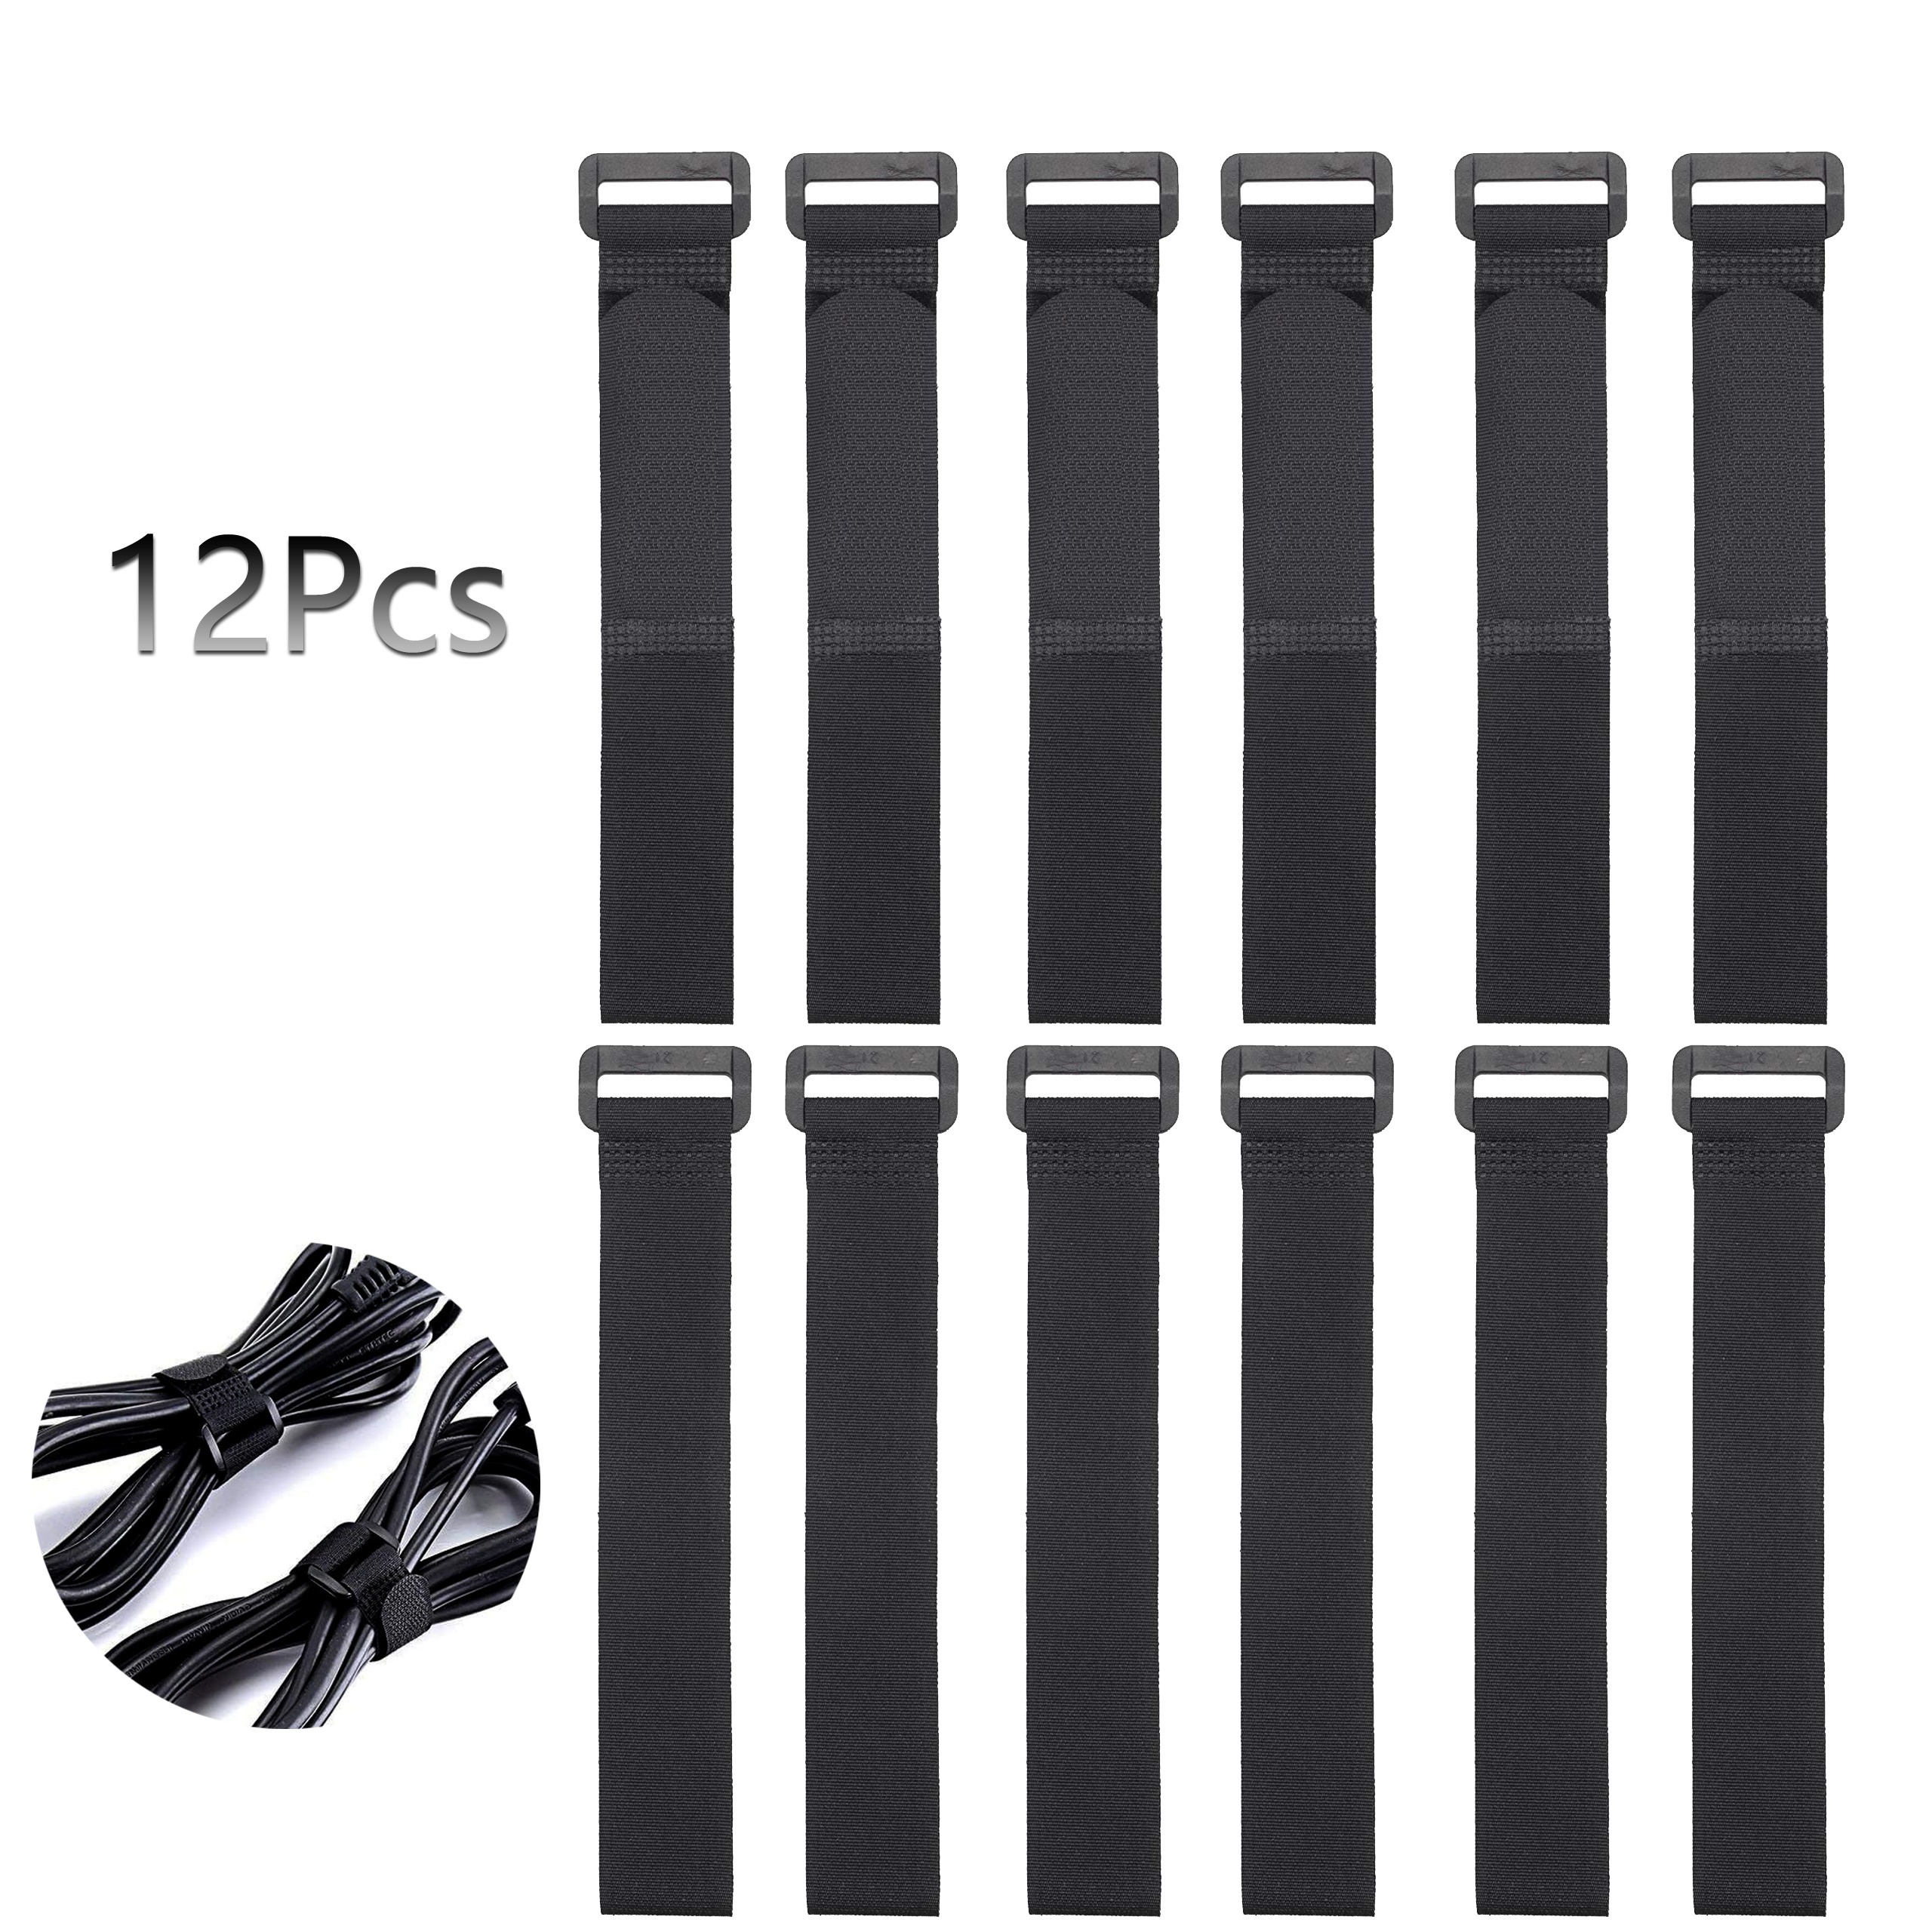 12pcs Hook And Loop Reusable Fastening Cable Ties - Reusable, Durable  Functional Ties For Home, Office, Workspace